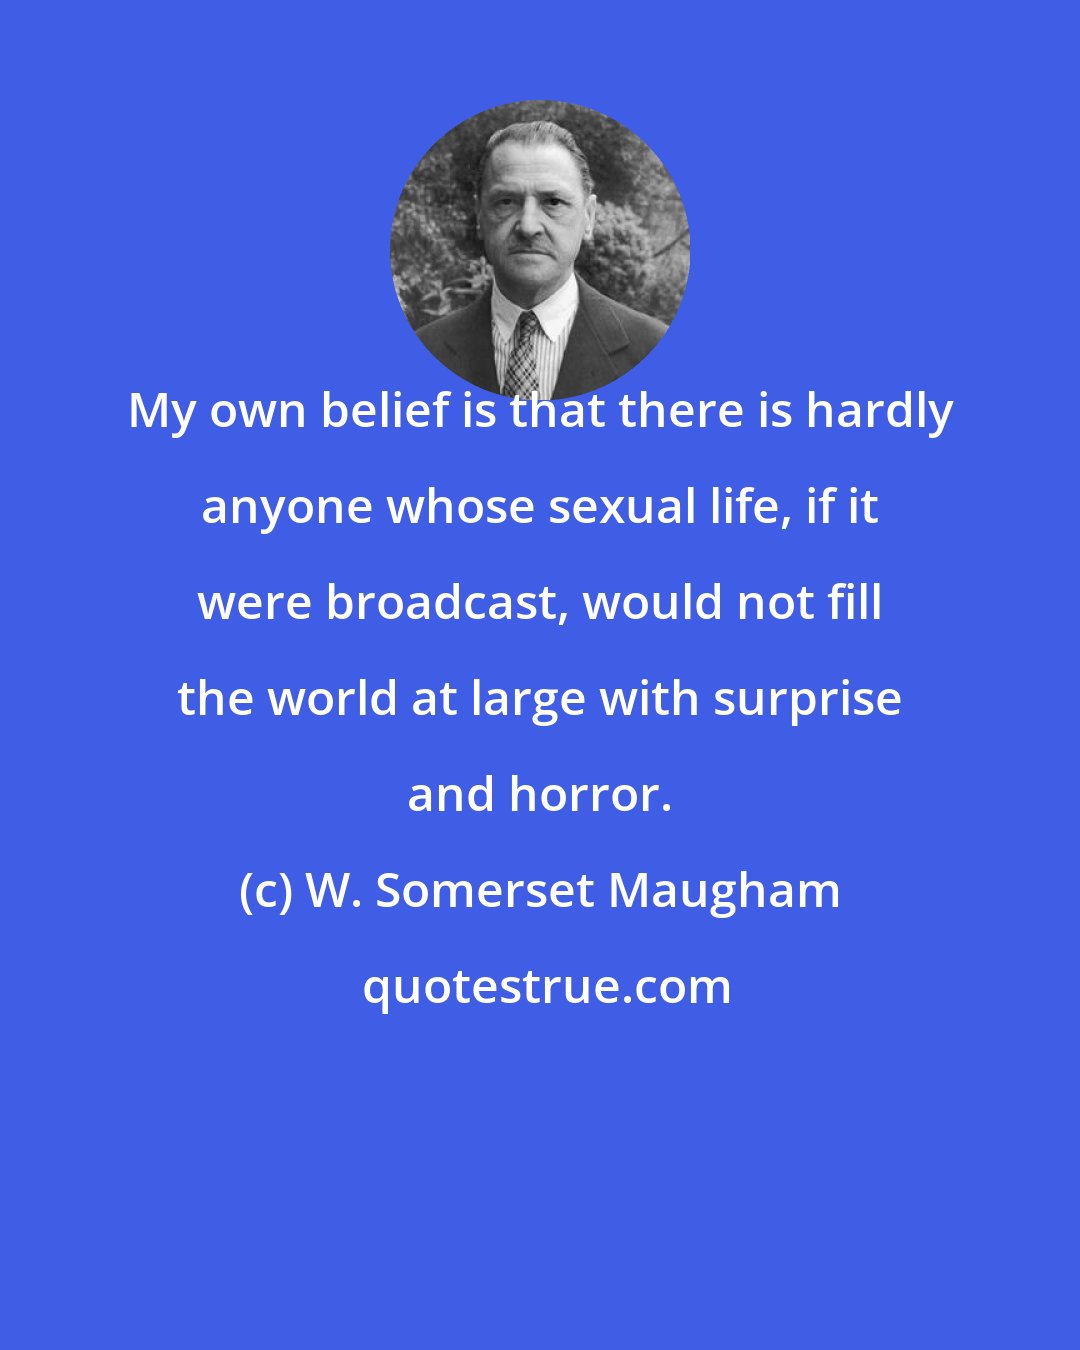 W. Somerset Maugham: My own belief is that there is hardly anyone whose sexual life, if it were broadcast, would not fill the world at large with surprise and horror.